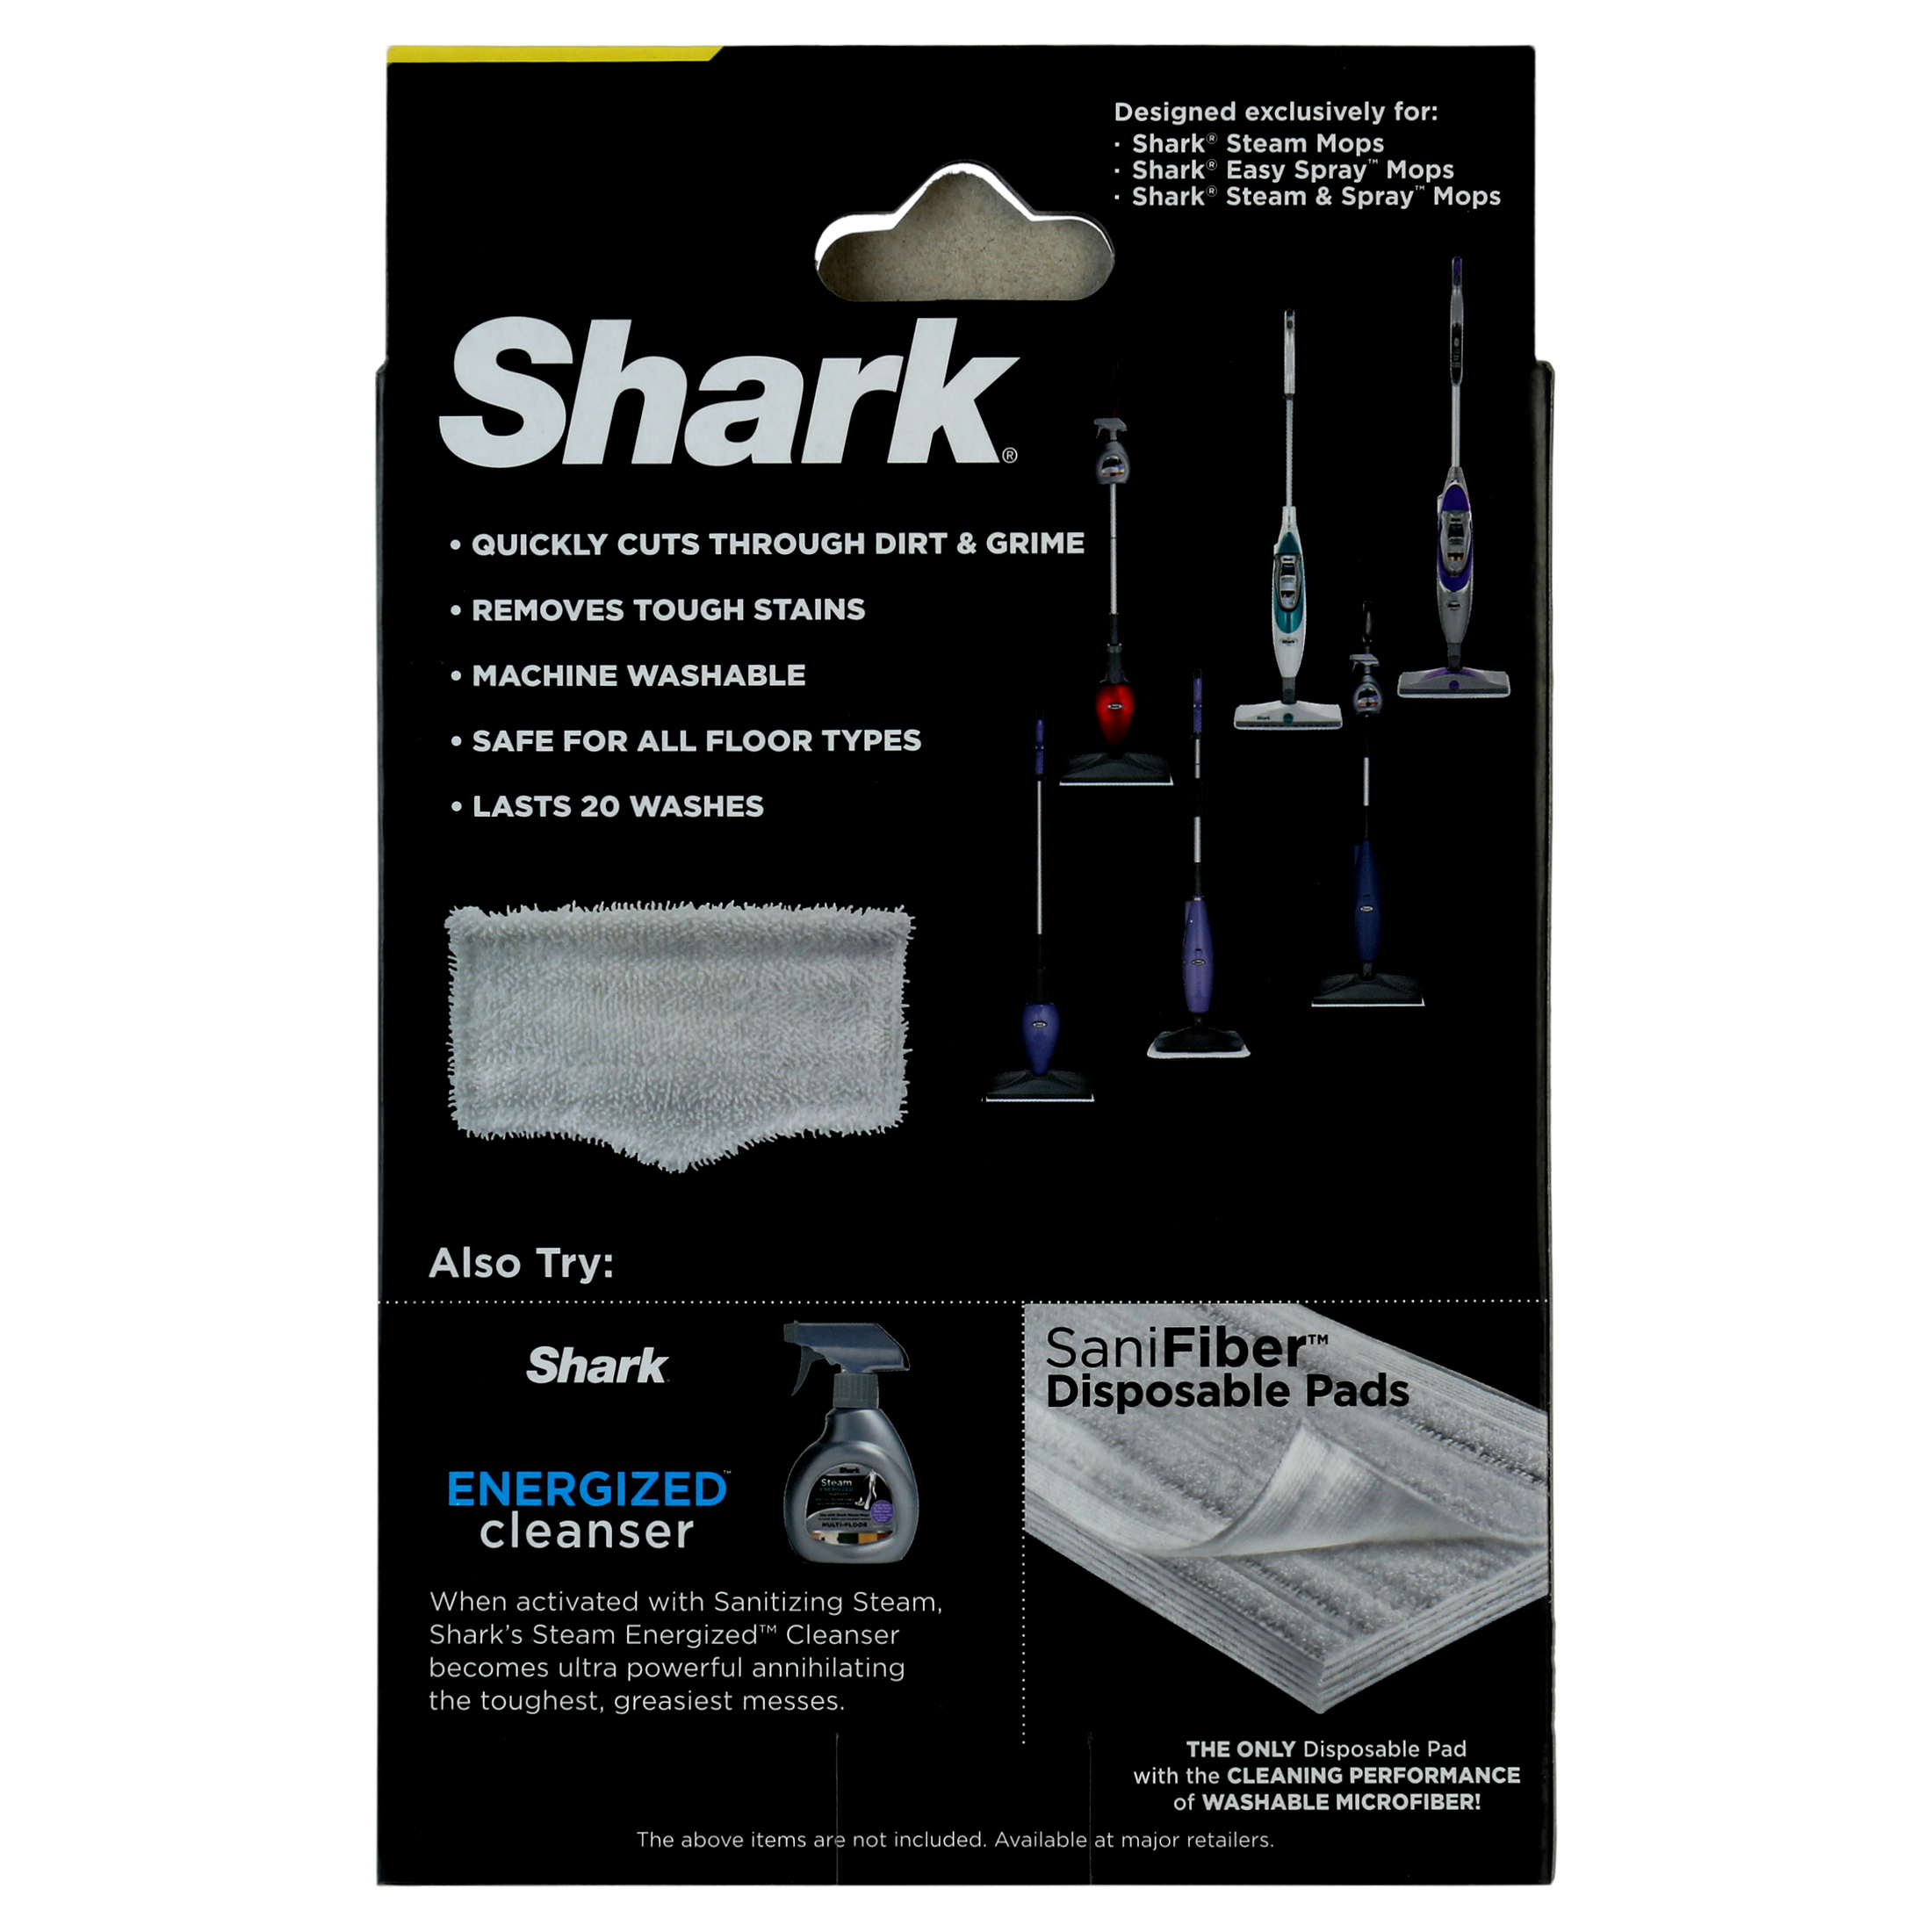 Shark Washable Microfiber Cleaning Pad, 1 count, compatible with Shark Steam Mop S1000WM - image 5 of 7